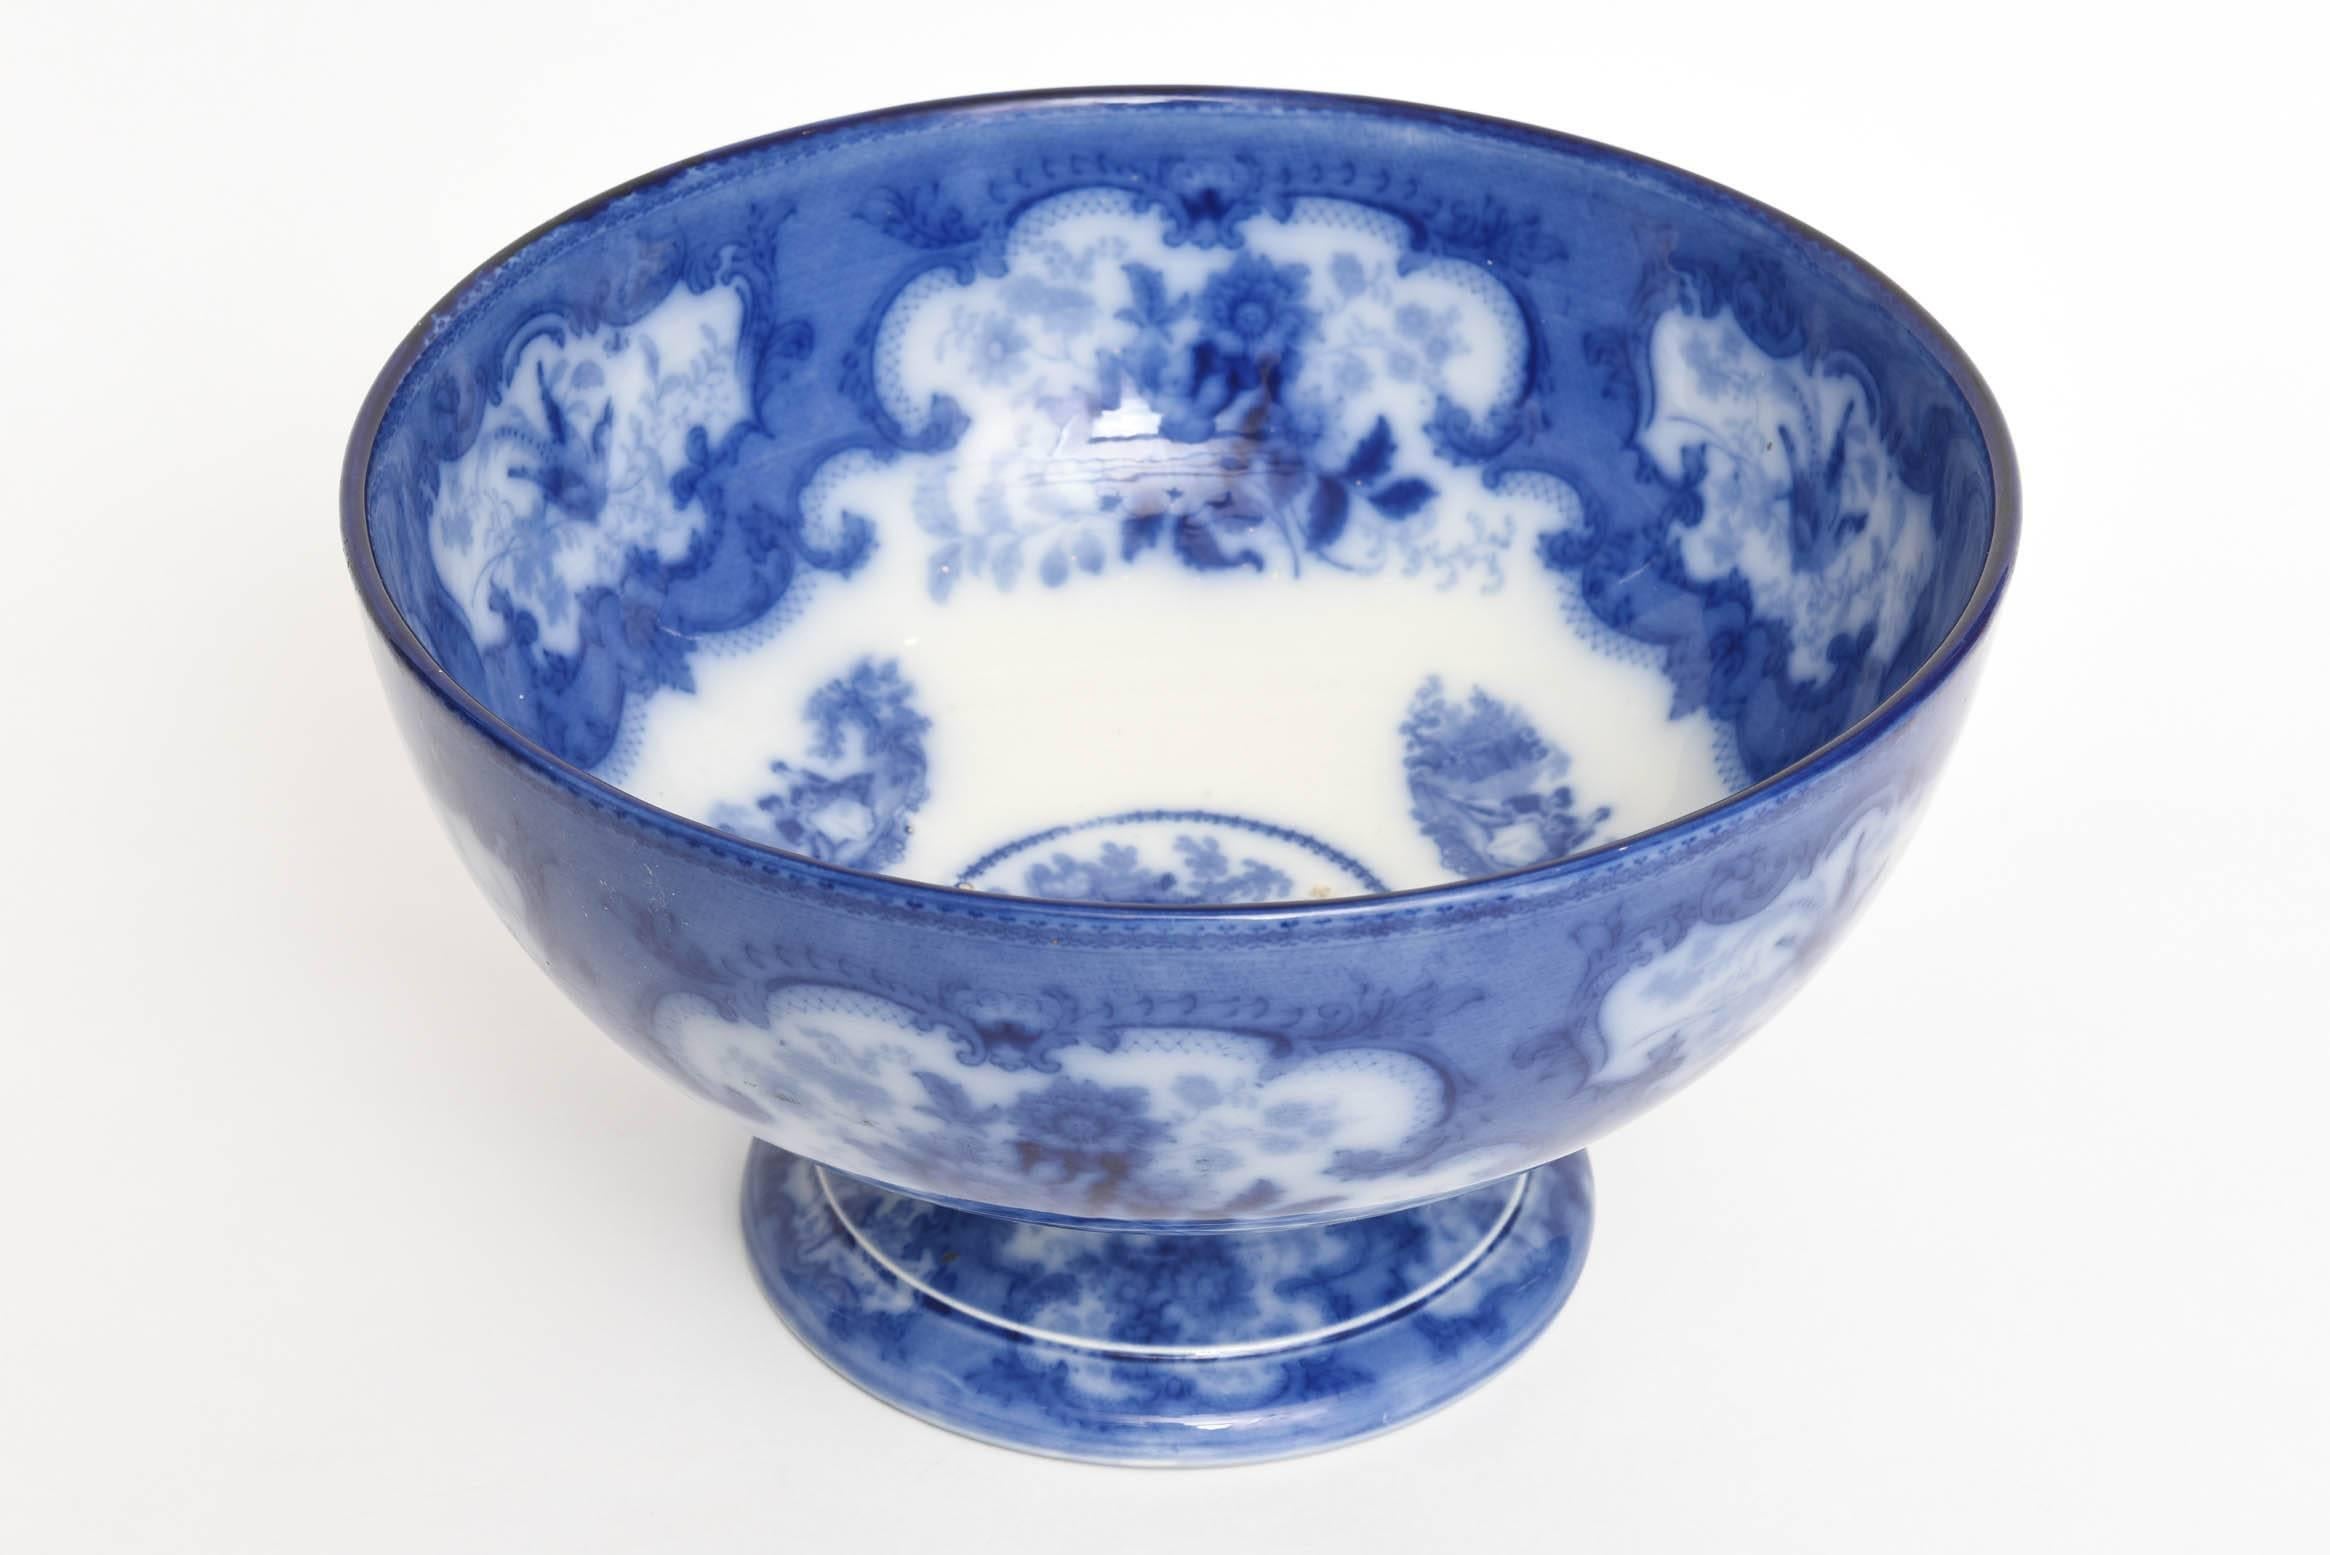 Hand-Crafted Antique Flo Blue Punch Bowl, Royal Doulton, Game Bird, Scenic, Strong Blue